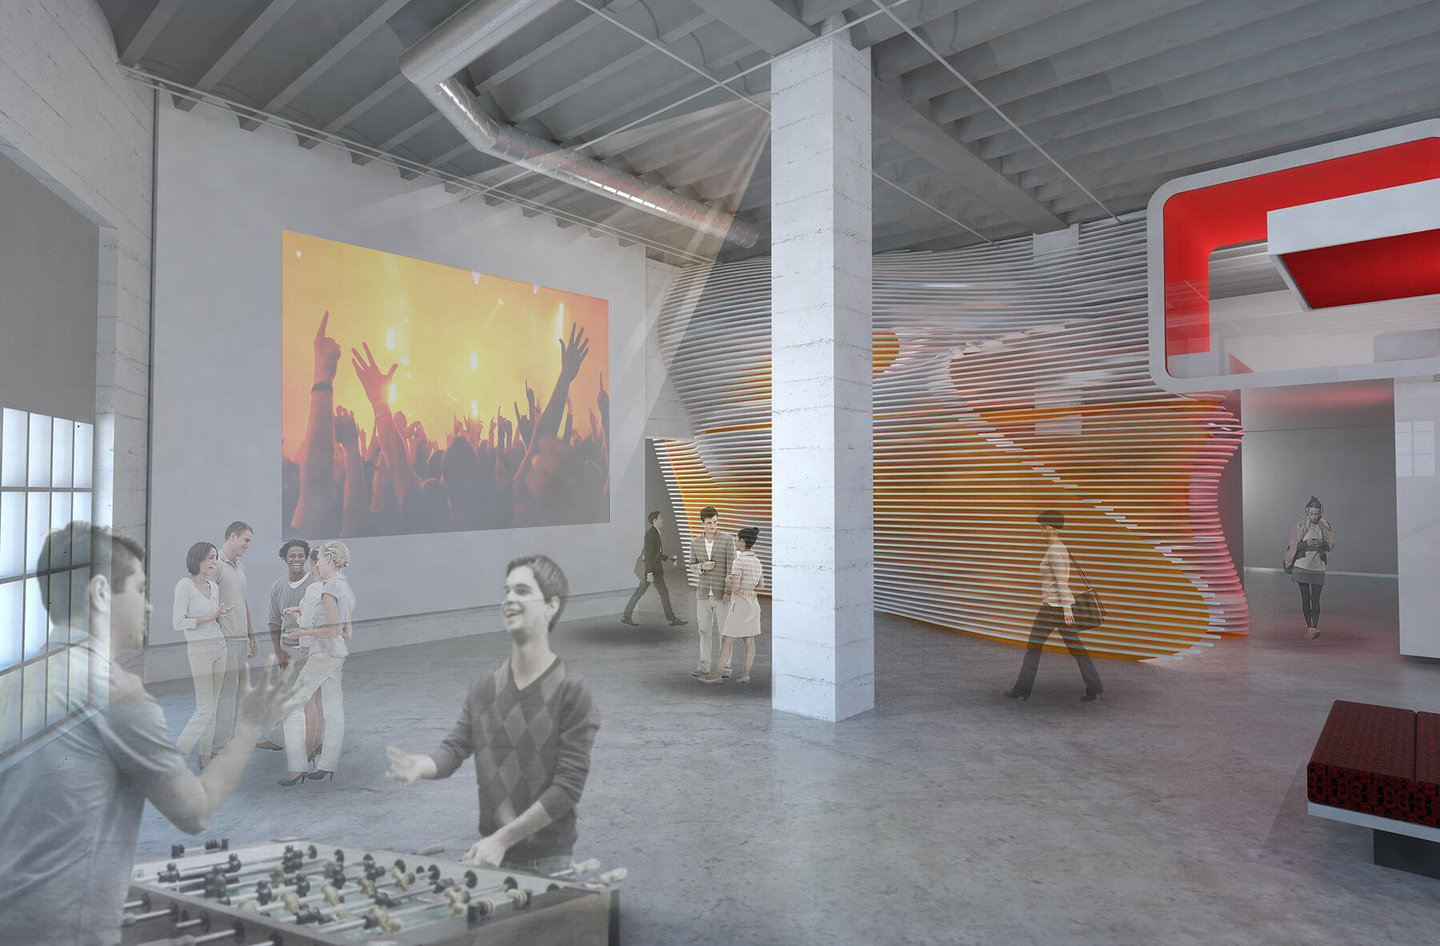 Main open area rendering of SONOS employees walking through or socializing.